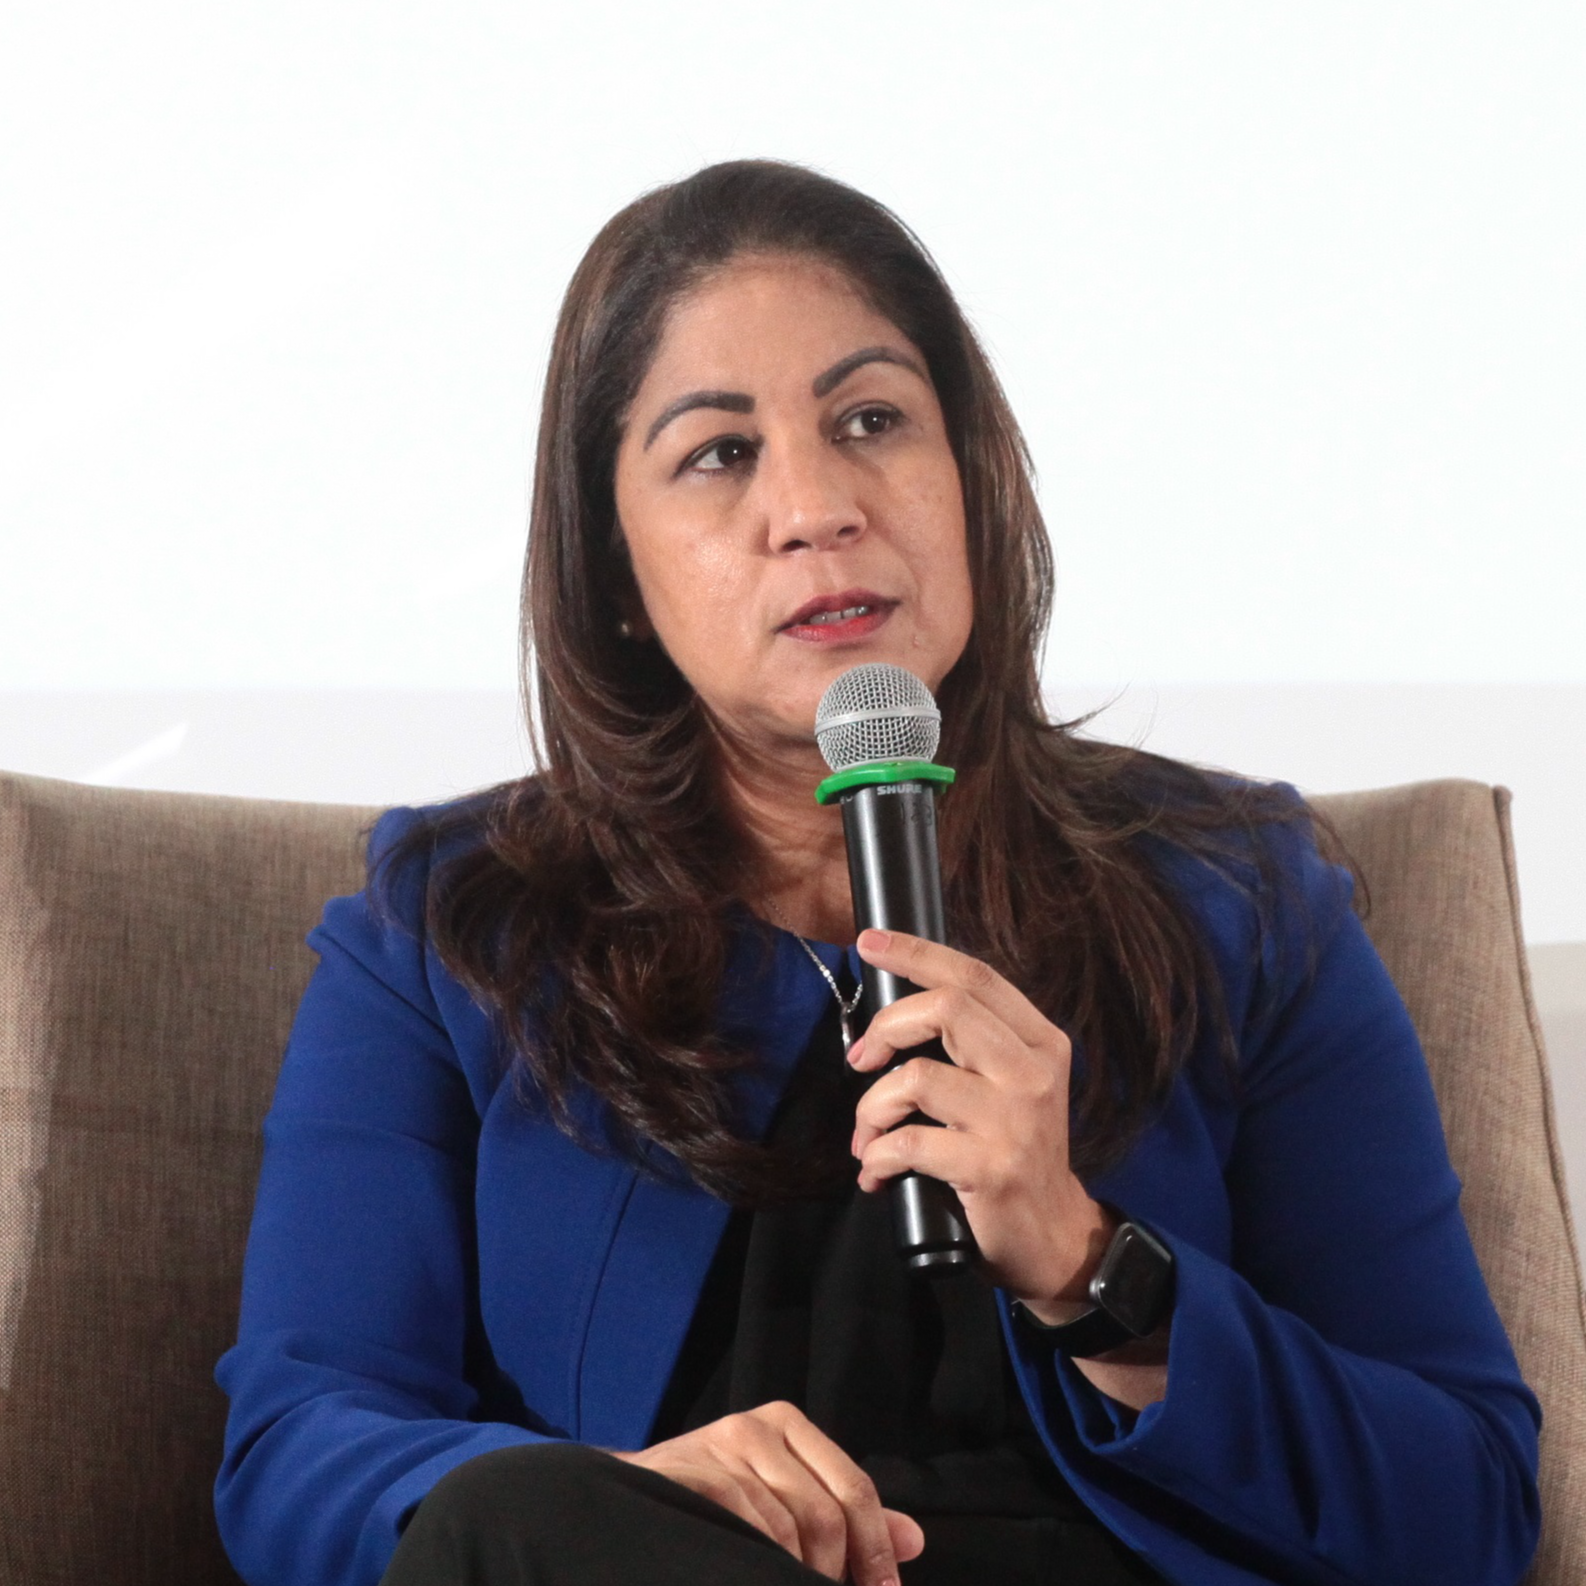 Vielka Guzmán. <p>20 years’ experience in Corporate Communications, Crisis Management, Public Relations and sustainability.</p>
<p><br />Solid education background with a Degree in Social Communications from the Universidad Catolica Santo Domingo and a Corporate Communication Executive Program in France, from GT Institute. <br />Multicultural.</p>
<p><br />Crisis resolution oriented. Excellent interpersonal, communications and negotiation skills.</p>